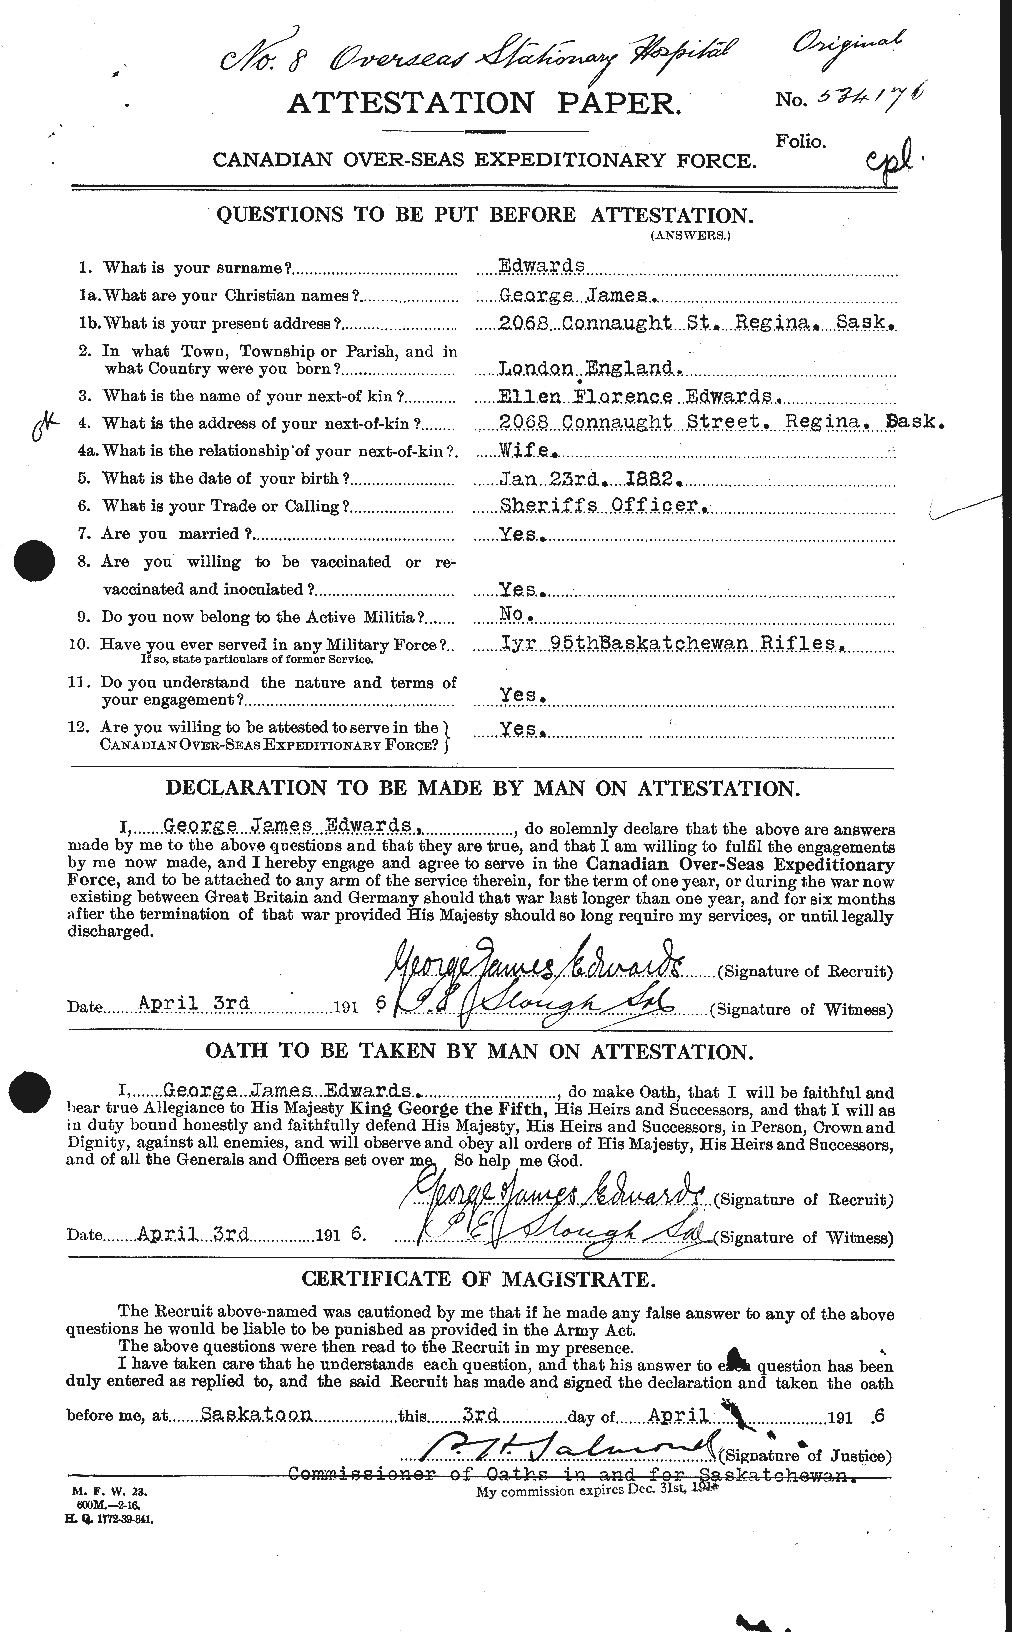 Personnel Records of the First World War - CEF 309689a